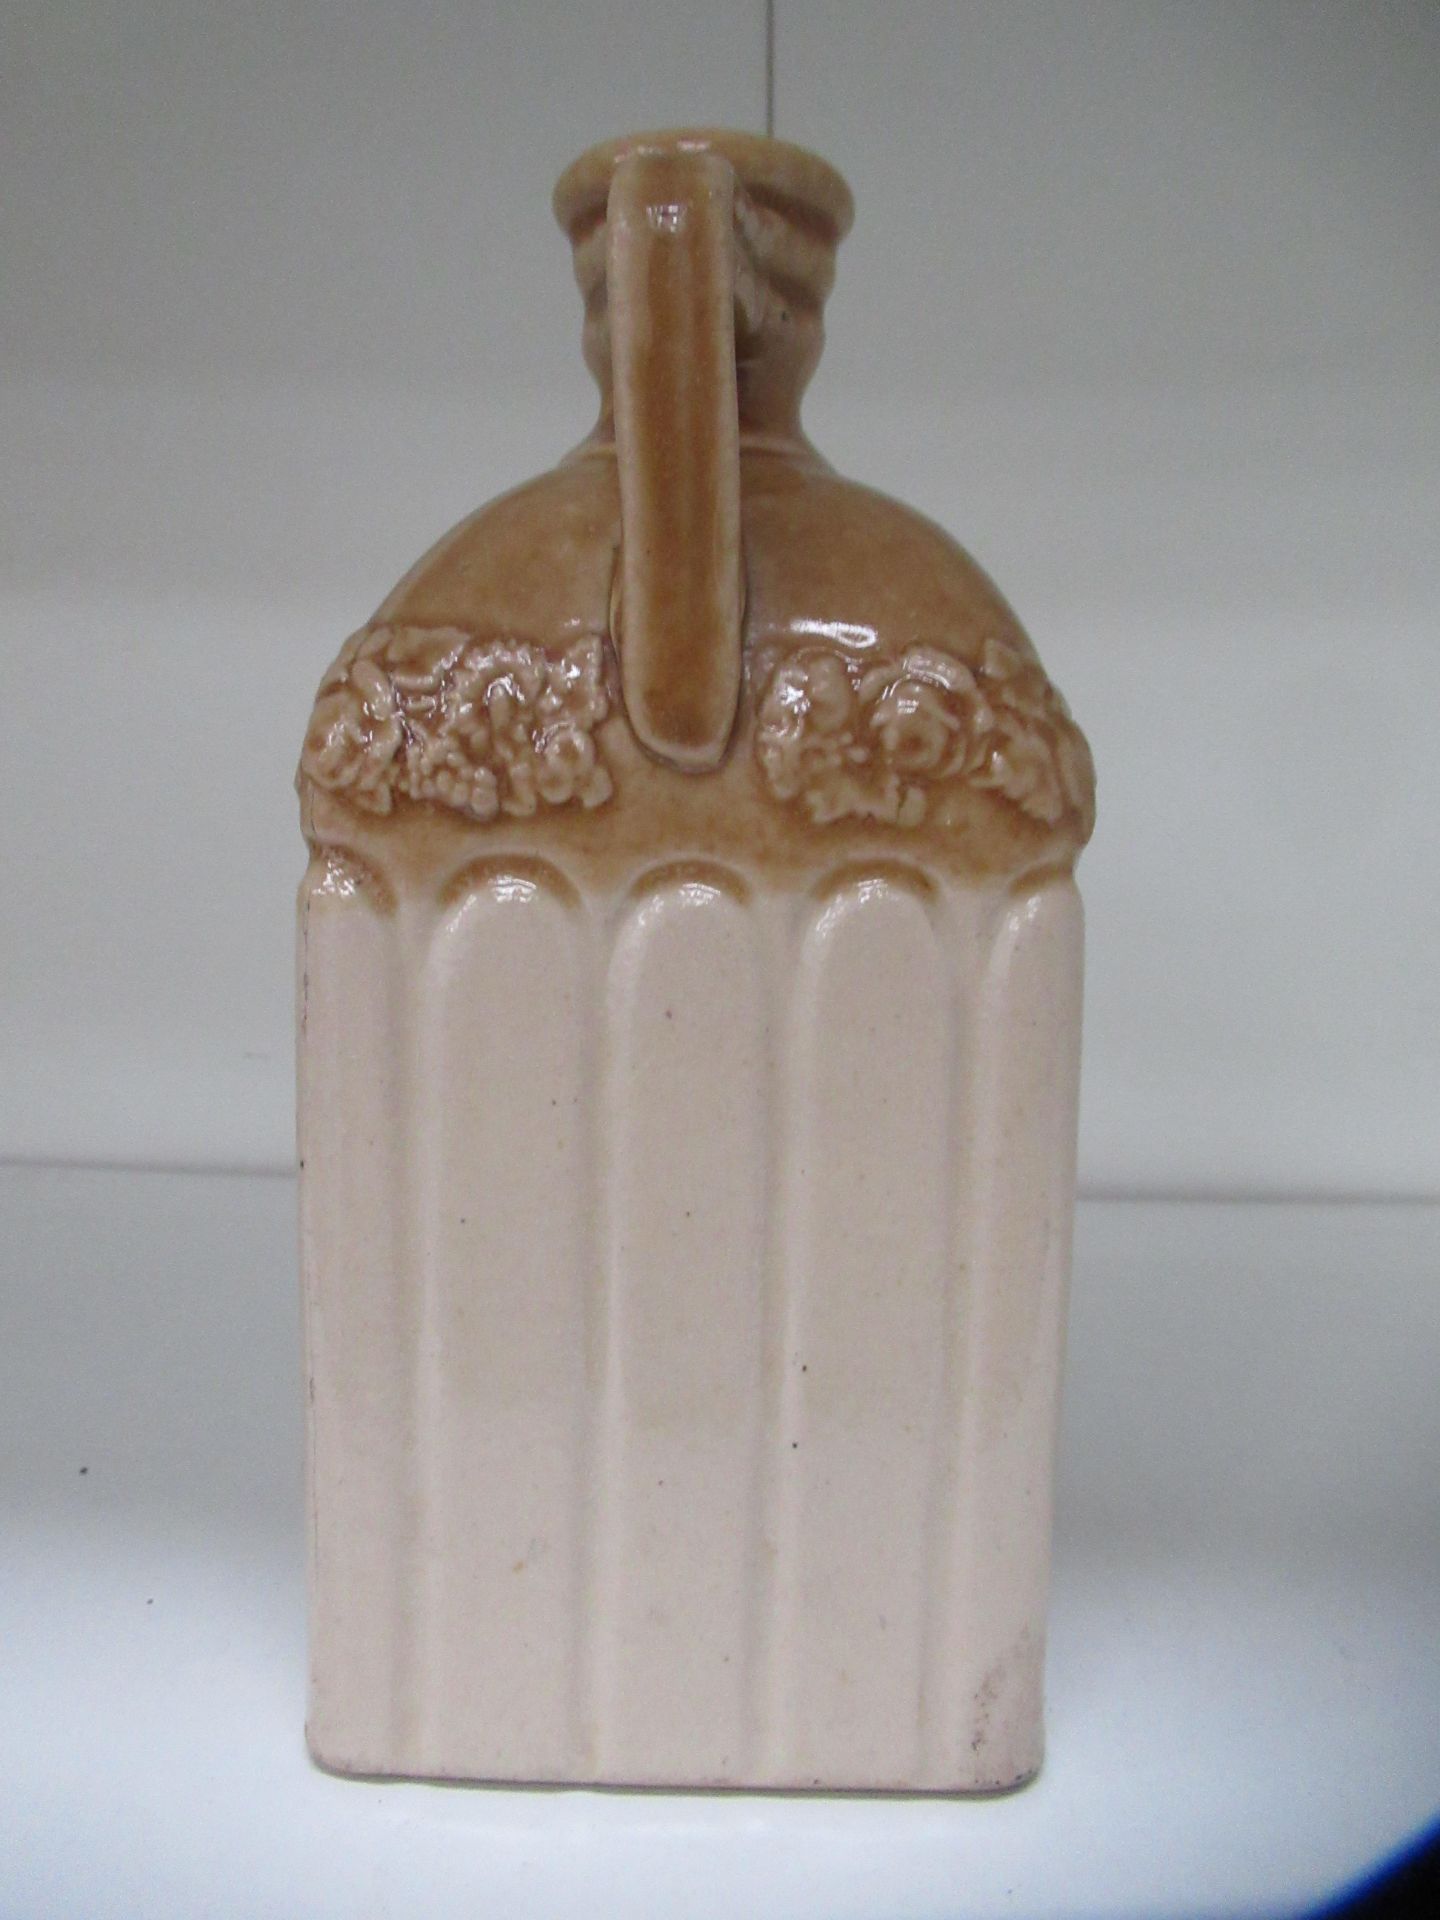 Stone bottle with floral detailing below bottle neck and 'G' stamp on handle - Image 5 of 8